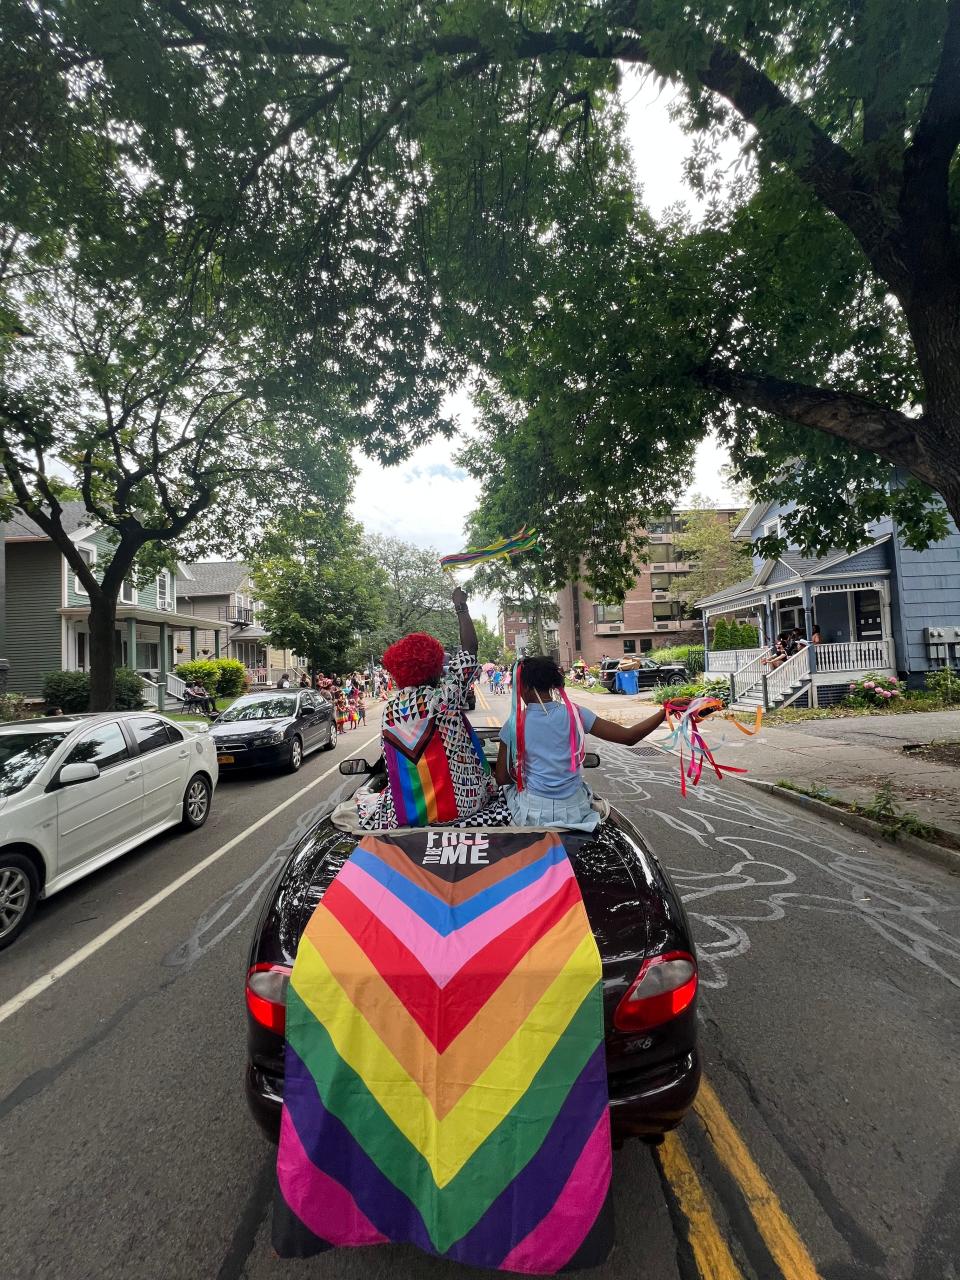 Reenah Golden and Todd Ranous are the Grand Marshal and Honorary Marshal of Rochester Pride this year. Both rode in the 2023 Rochester Pride Parade on Saturday, July 15, 2023. Golden, the founder of The Avenue BlackBox Theatre on Joseph Avenue, was nominated and selected for her contributions to improve the lives of members of the local LGBTQ+ community. Ranous, who has worked for Monroe County's Department of Social Services for a few decades, helped to establish mandatory LGBTQ+ training for all service staff and foster parents.